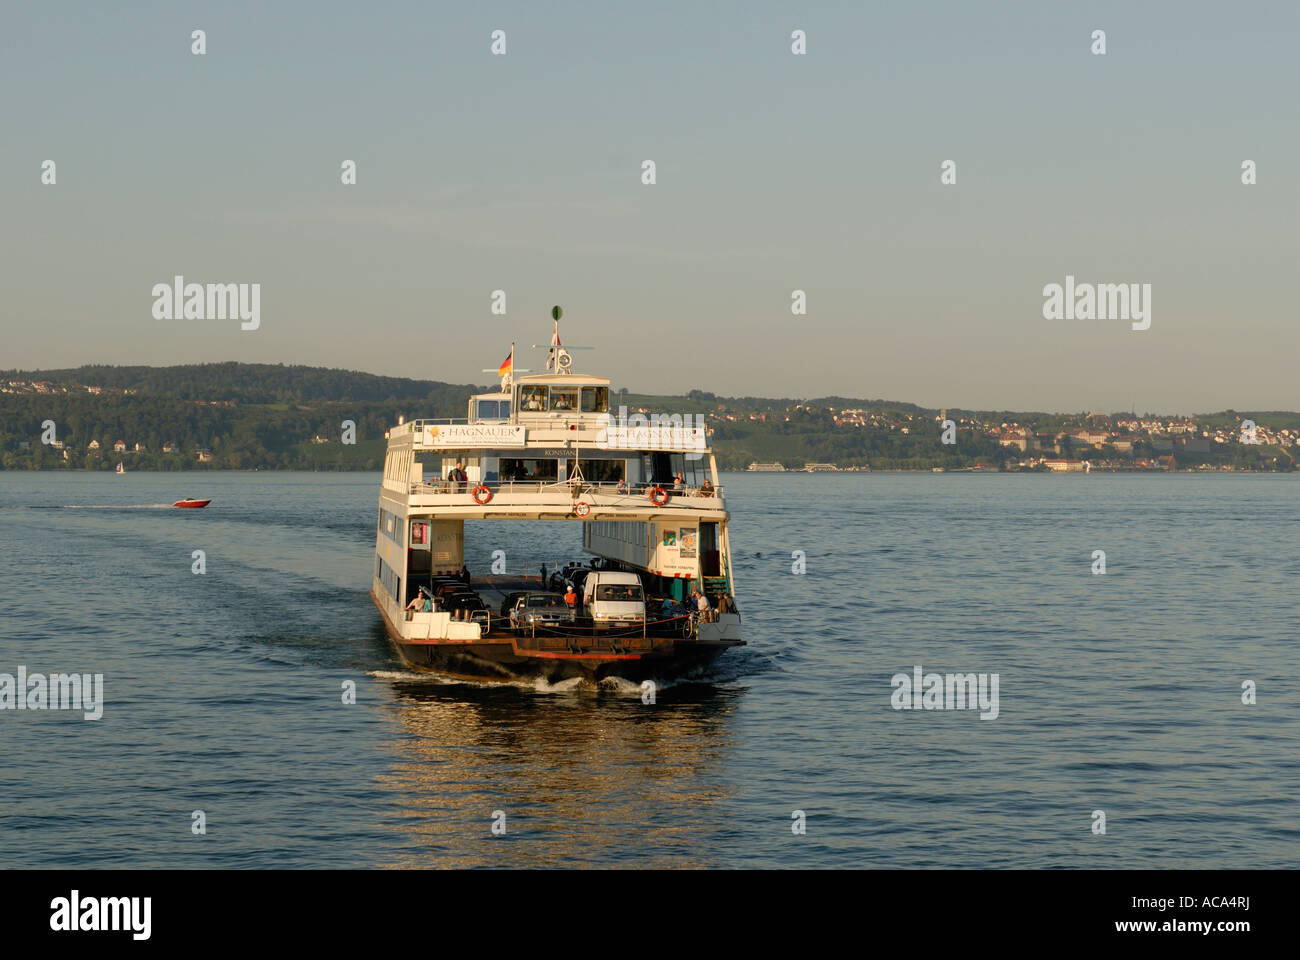 A ferry-boat on lake constance, Meersburg, Baden Wuerttemberg, Germany, Europe. Stock Photo